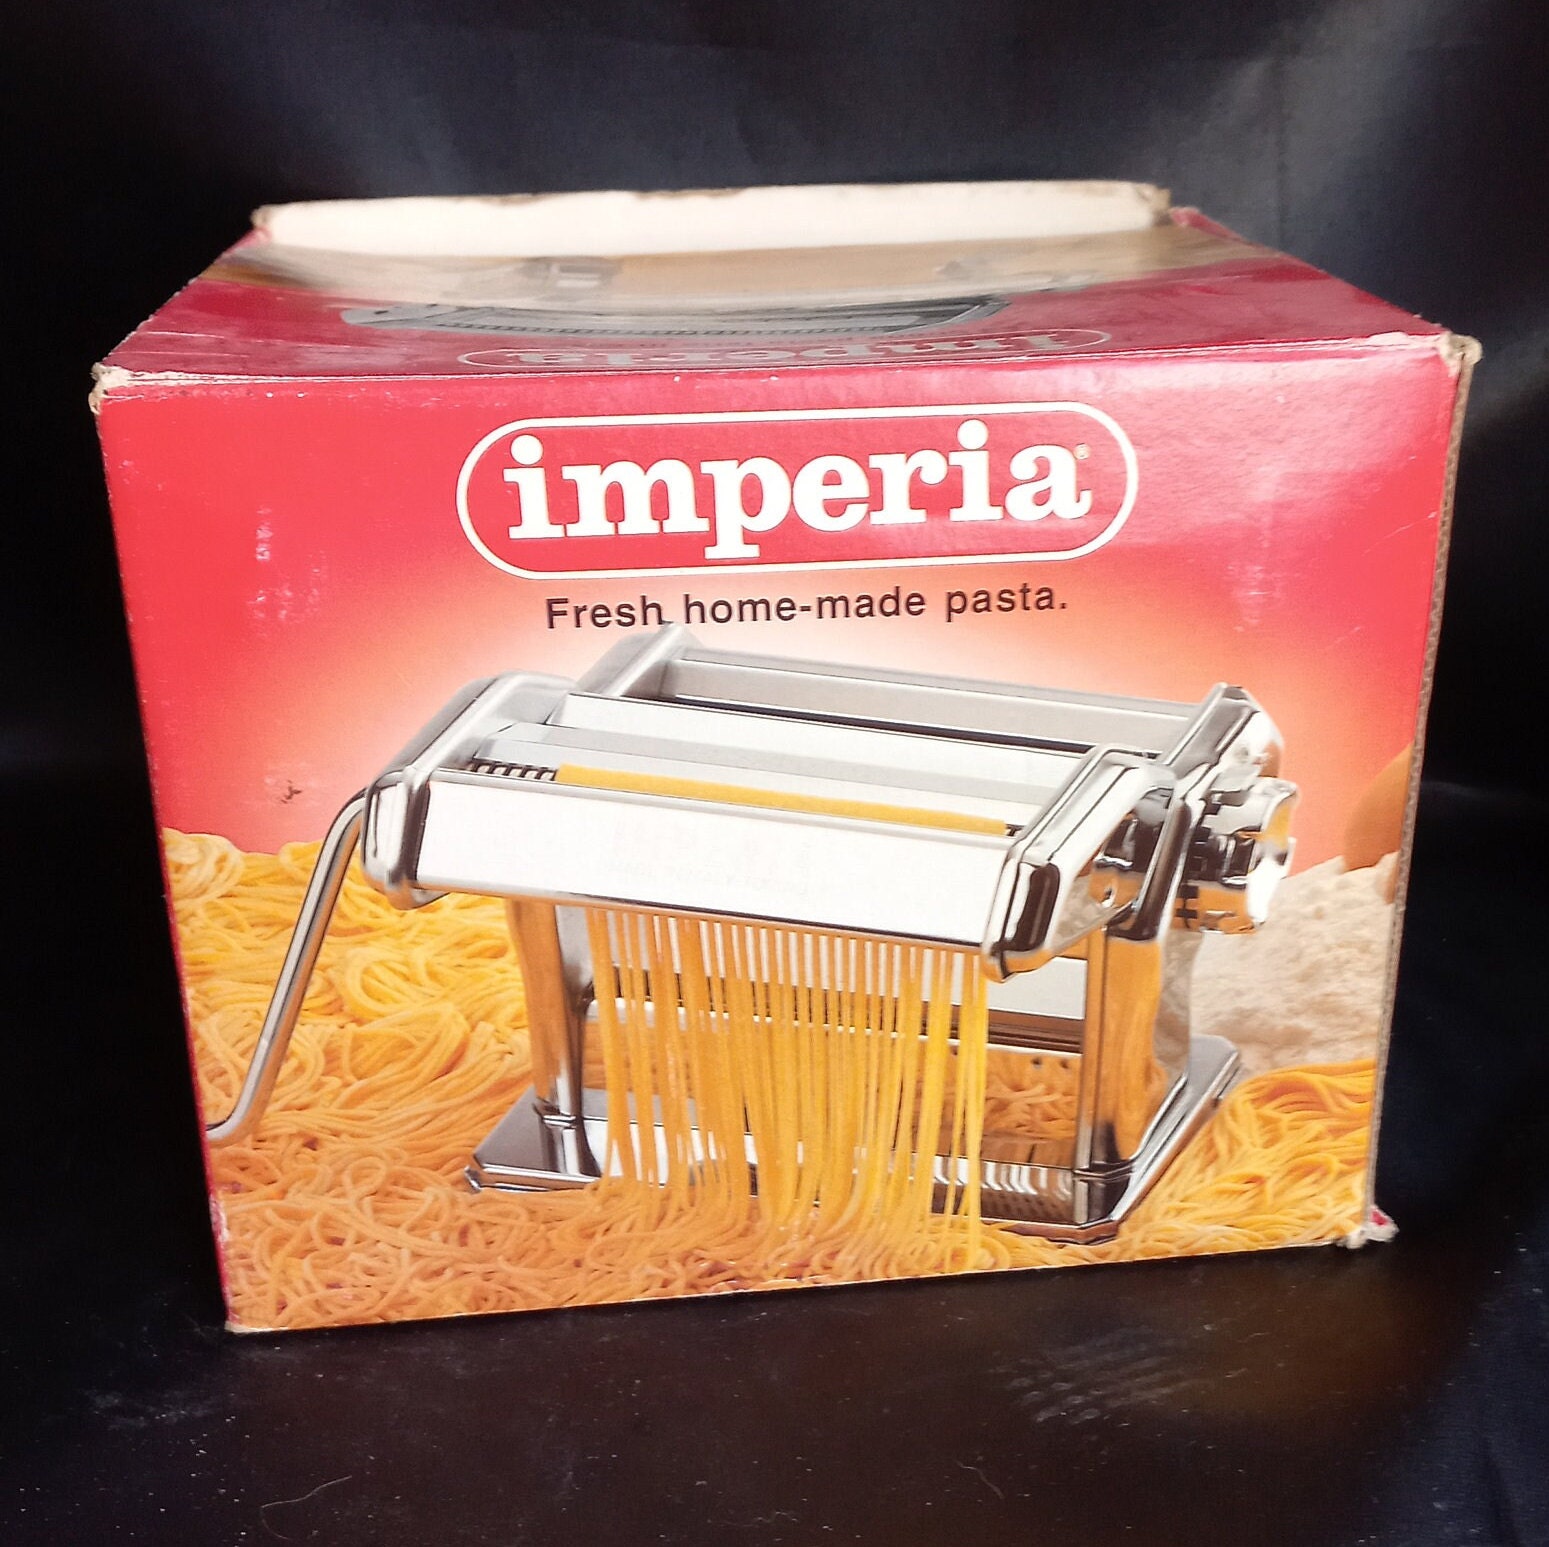 1pc, Pasta Maker Machine, Roller Pasta Maker, Adjustable Thickness Settings  Manual Noodles Maker With Handle, Perfect For Homemade Pasta, Lasagna, Spa